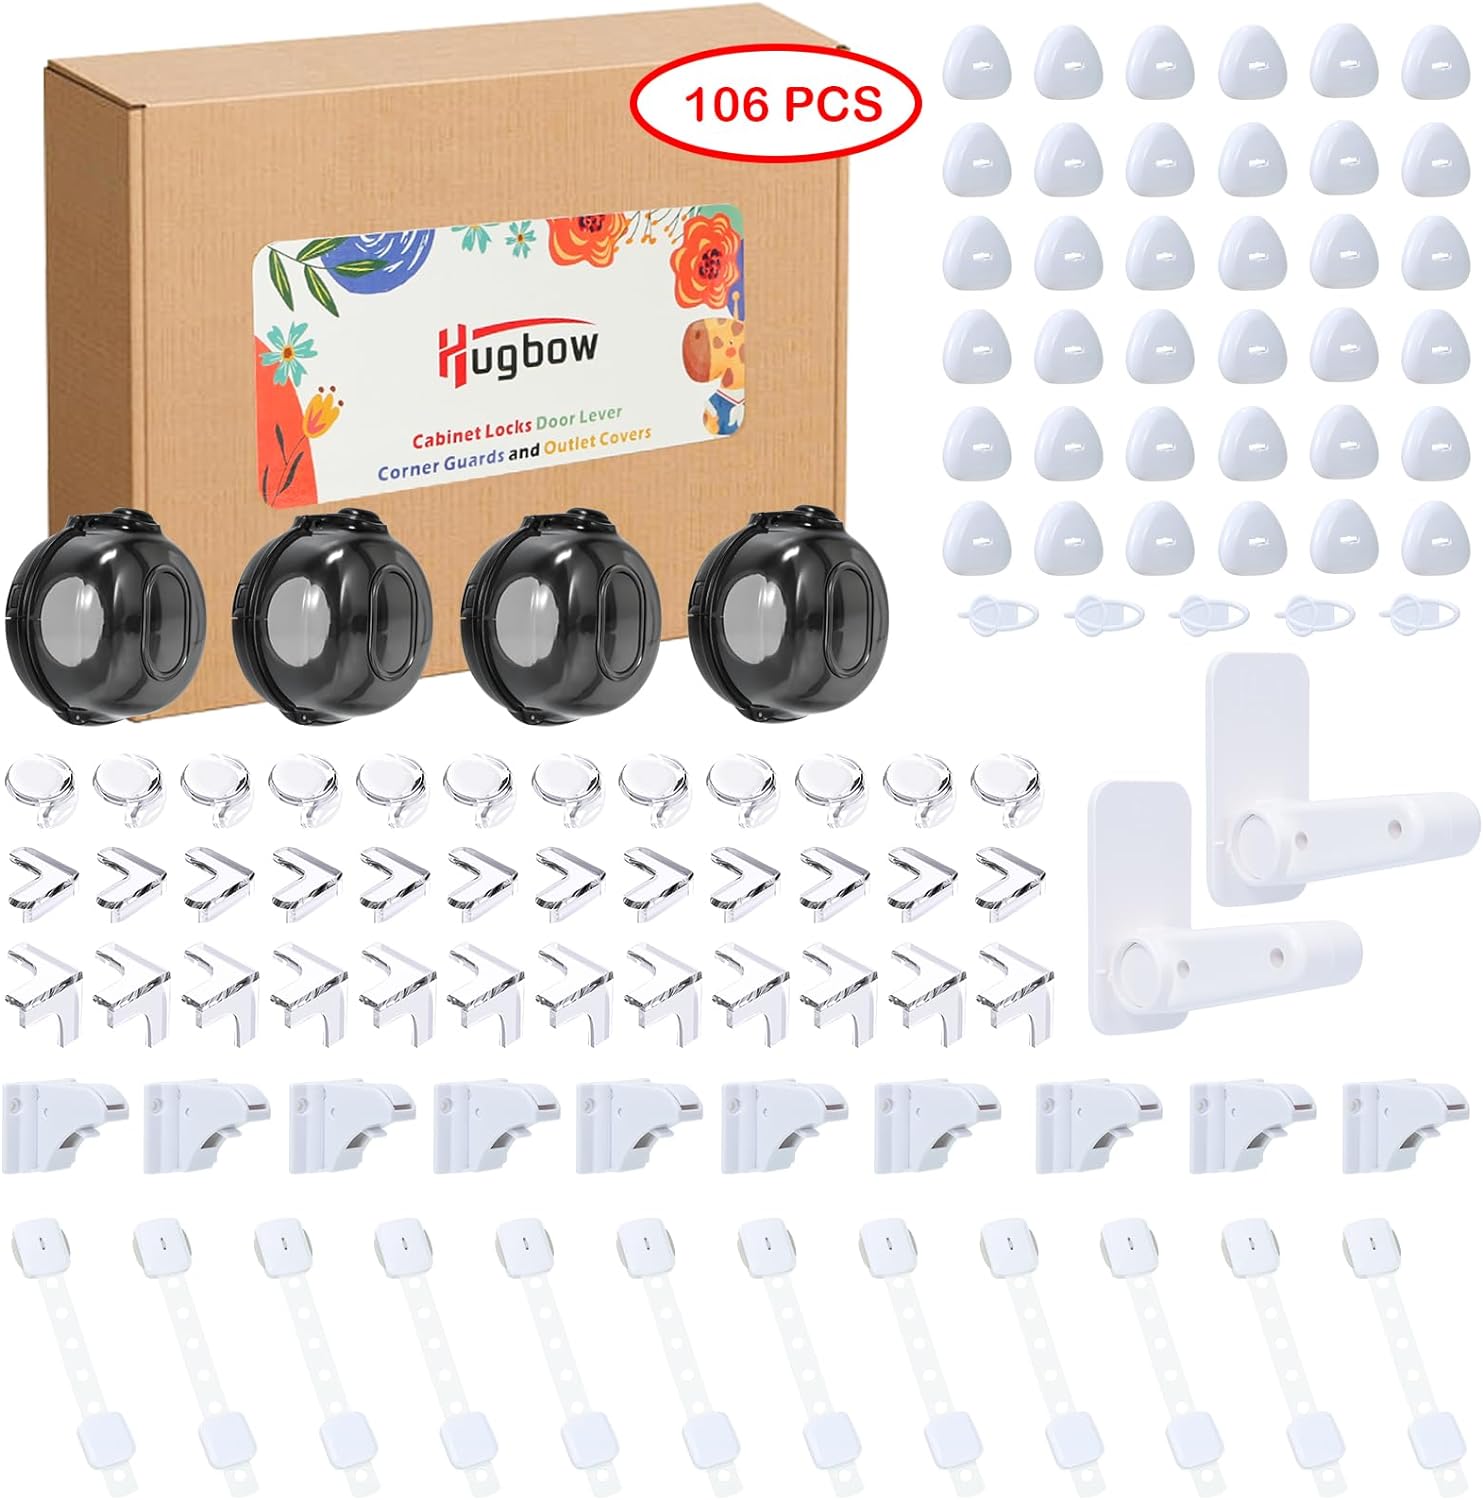 Baby Proof Kit, 106 Packs Baby Proofing Kit Essentials Child Proofing Appliance with Cabinet Locks, Door Lever Corner Guards and Outlet Covers – All-in-one Super Value Child Proof Kit